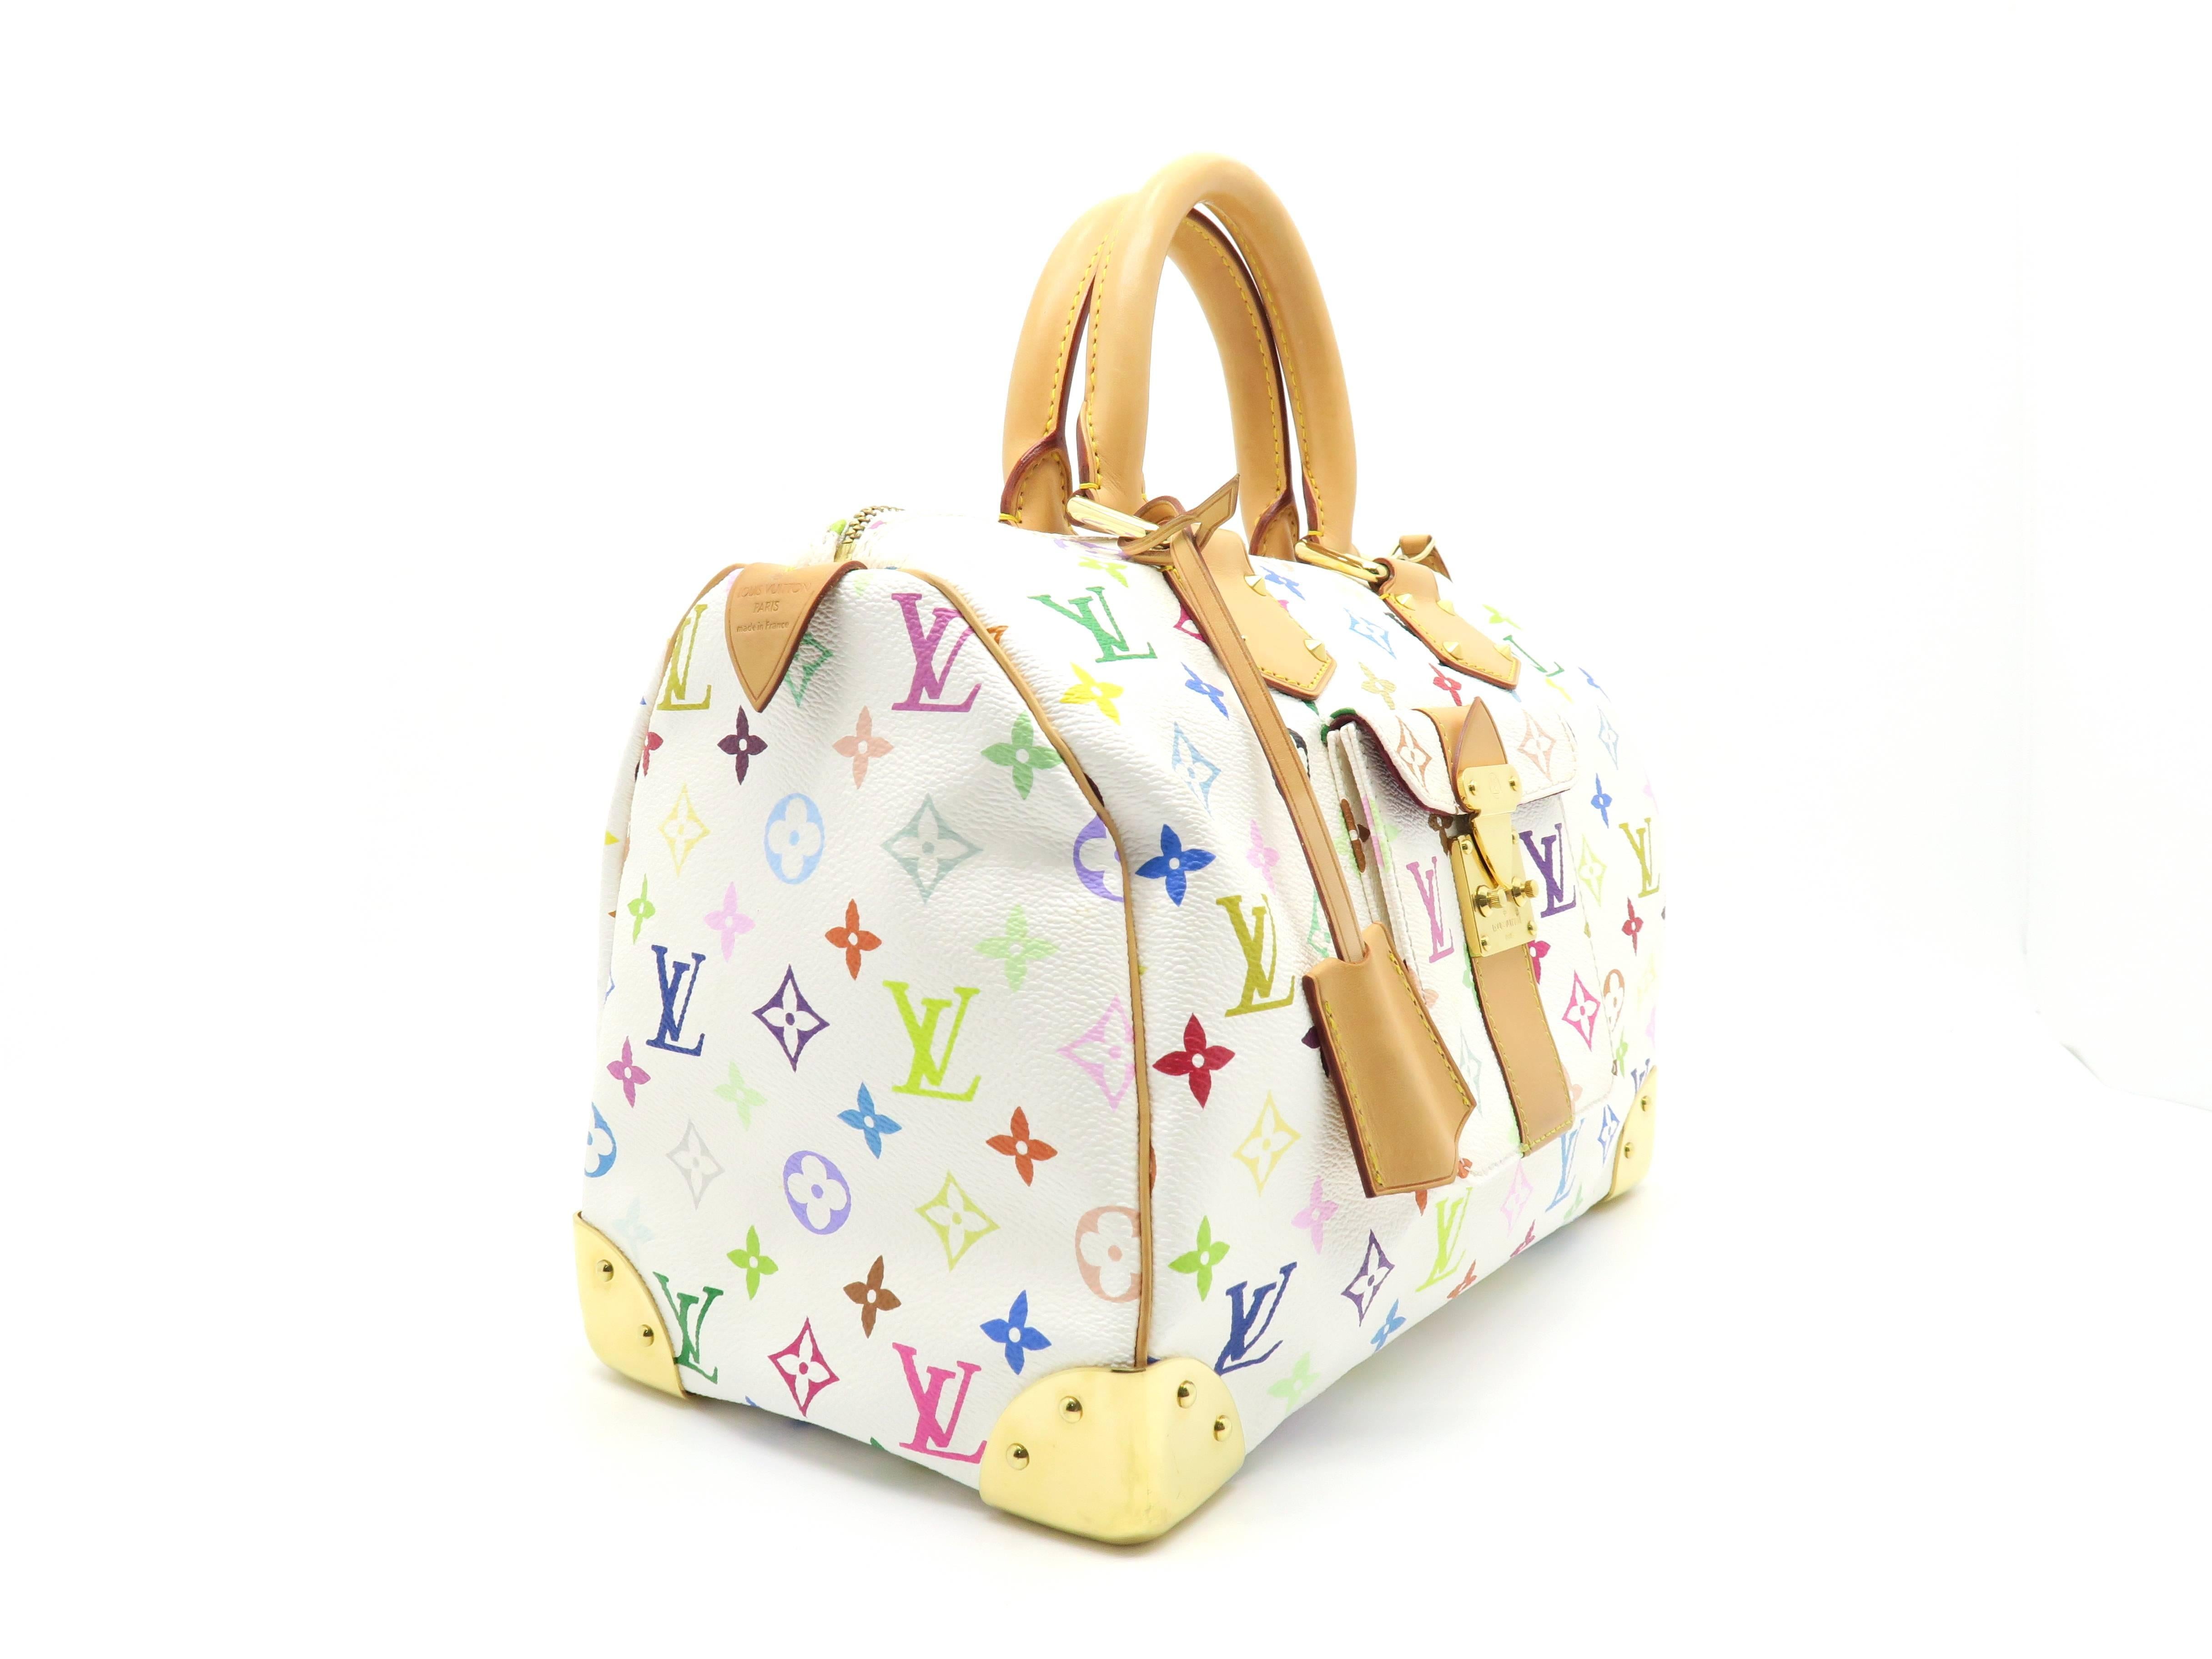 Color: White

Material: Monogram Multicolore

Condition: Rank A
Overall: Good, few minor defects
Surface: Minor Scratches
Corners: Minor Scratches
Edges: Minor Scratches
Handles/Straps: Minor Scratches
Hardware: Minor Scratches

Dimension: W30 × H21